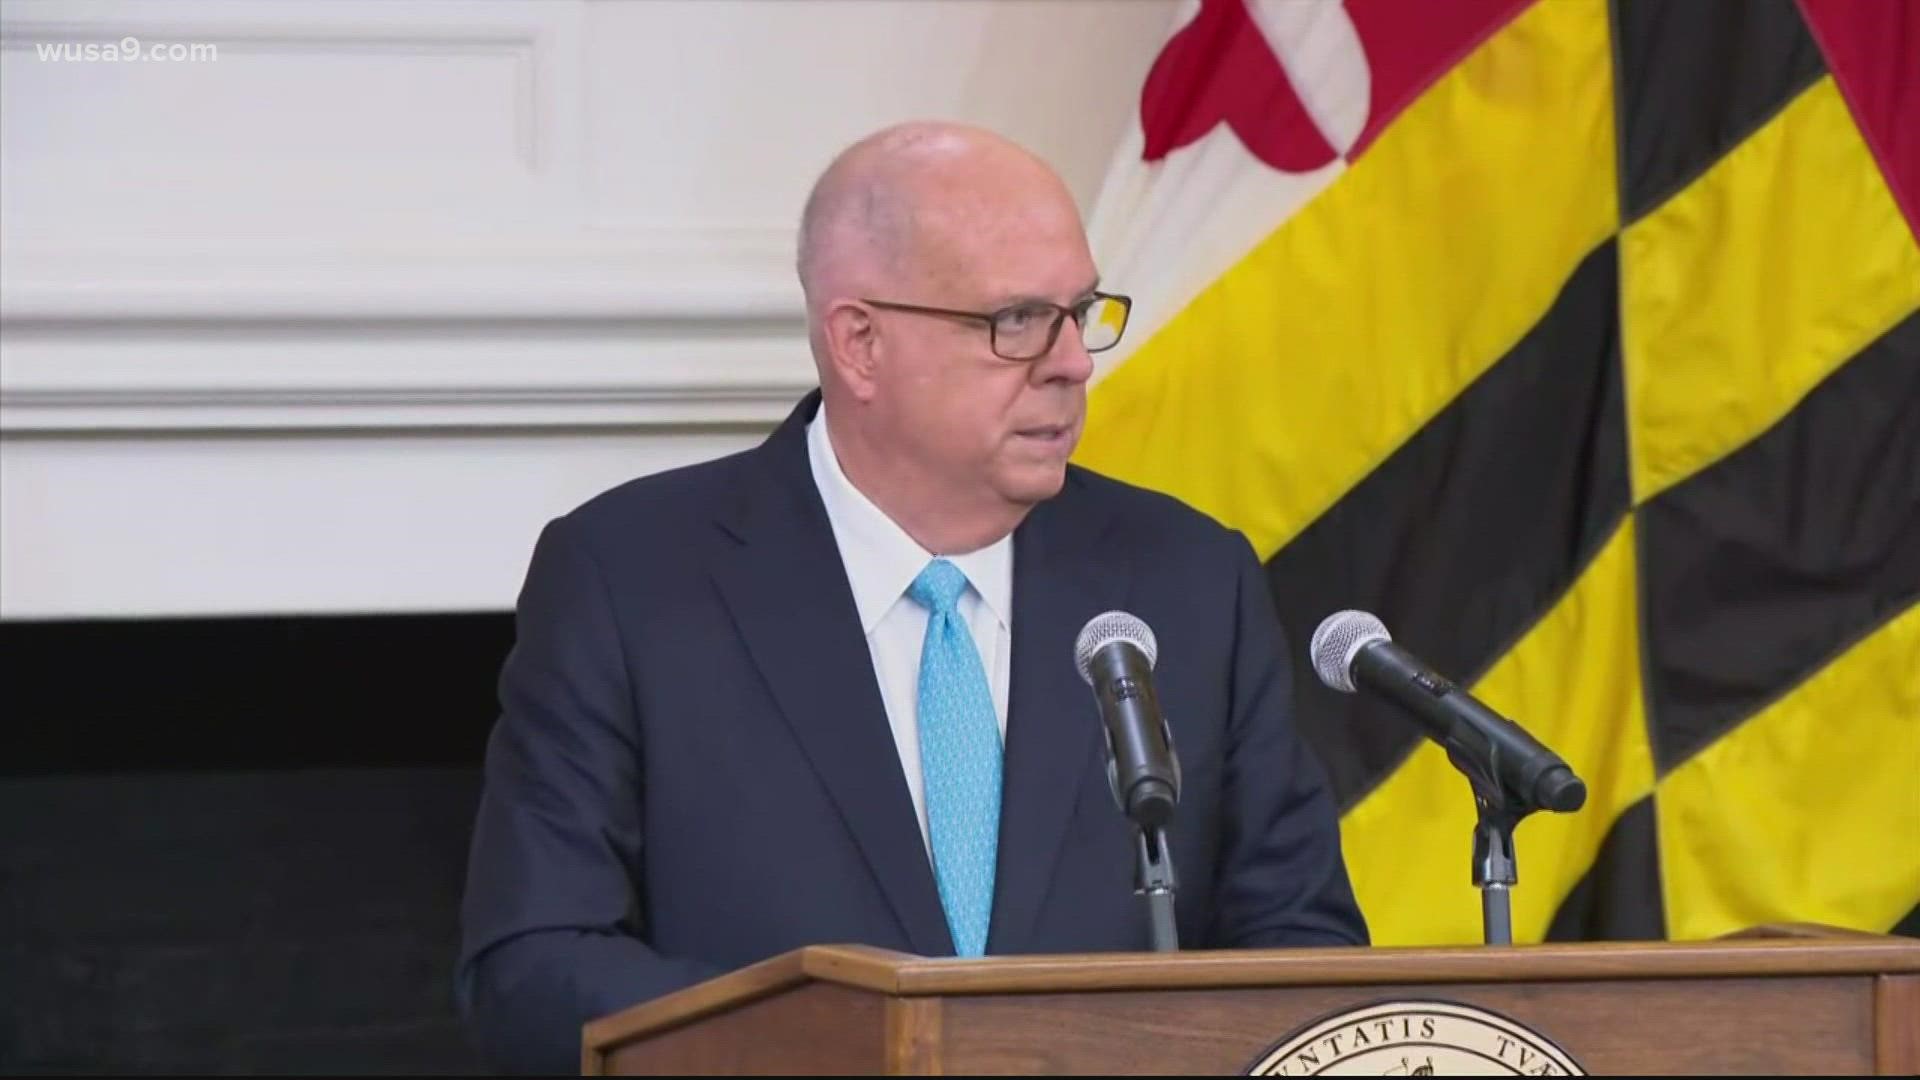 As the state of Maryland continues to lead the nation as one of the most vaccinated states, Hogan says we have moved to a phase of immunity.